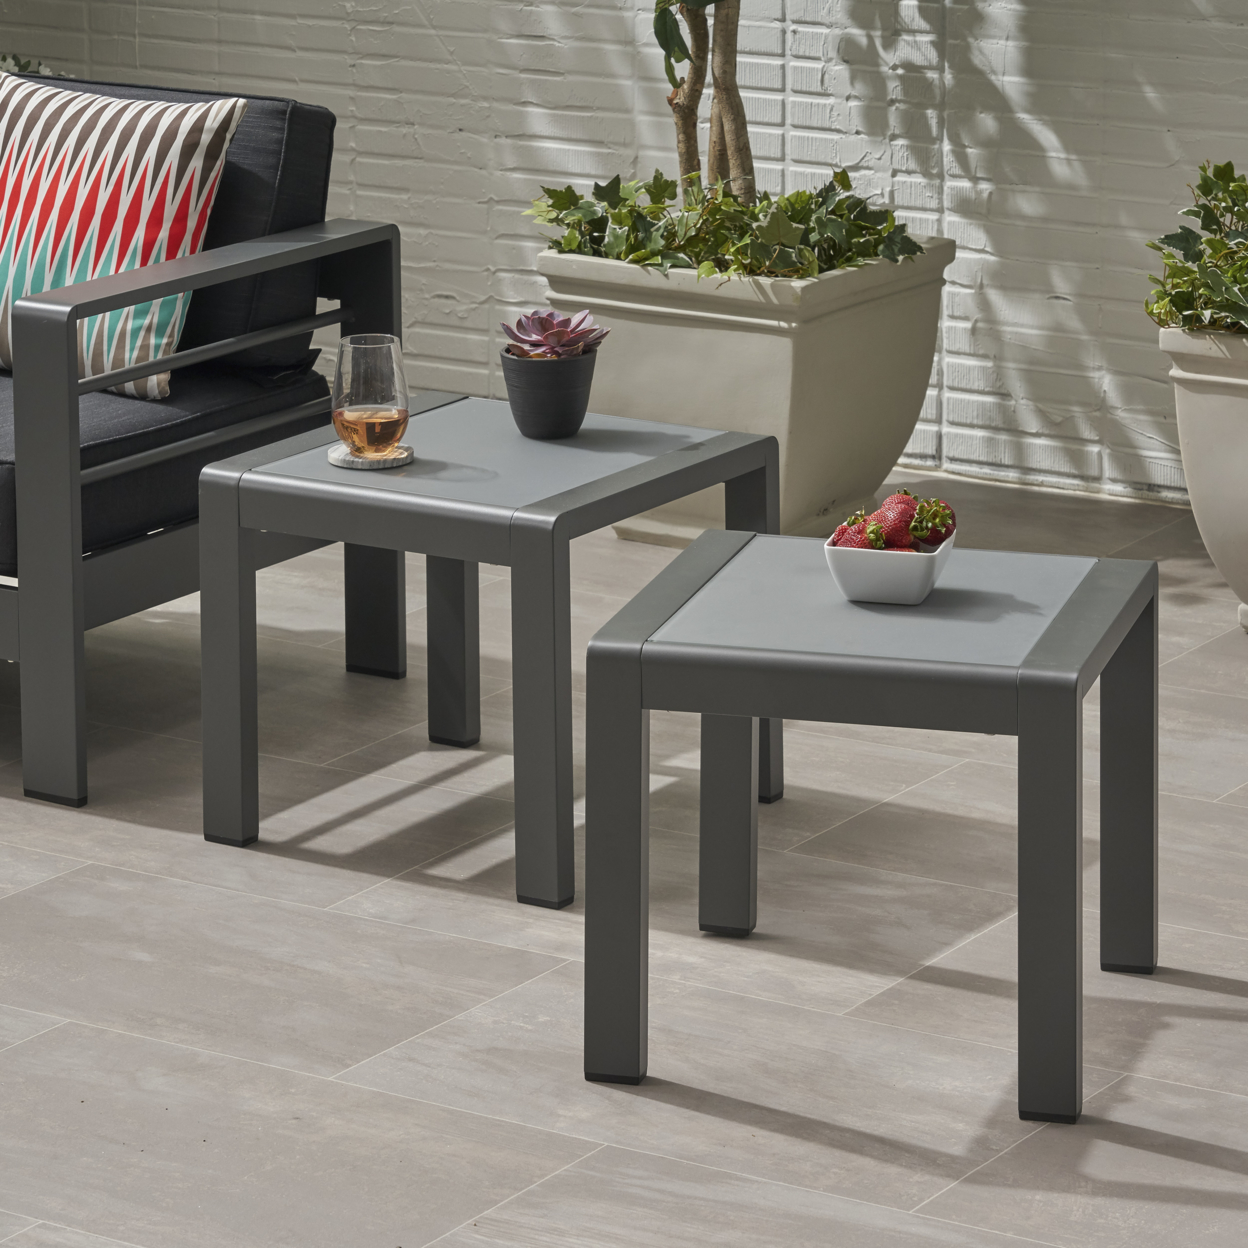 Bunny Coral Outdoor Aluminum Side Table (Set Of 2) - Gray Finish + Matte Gray